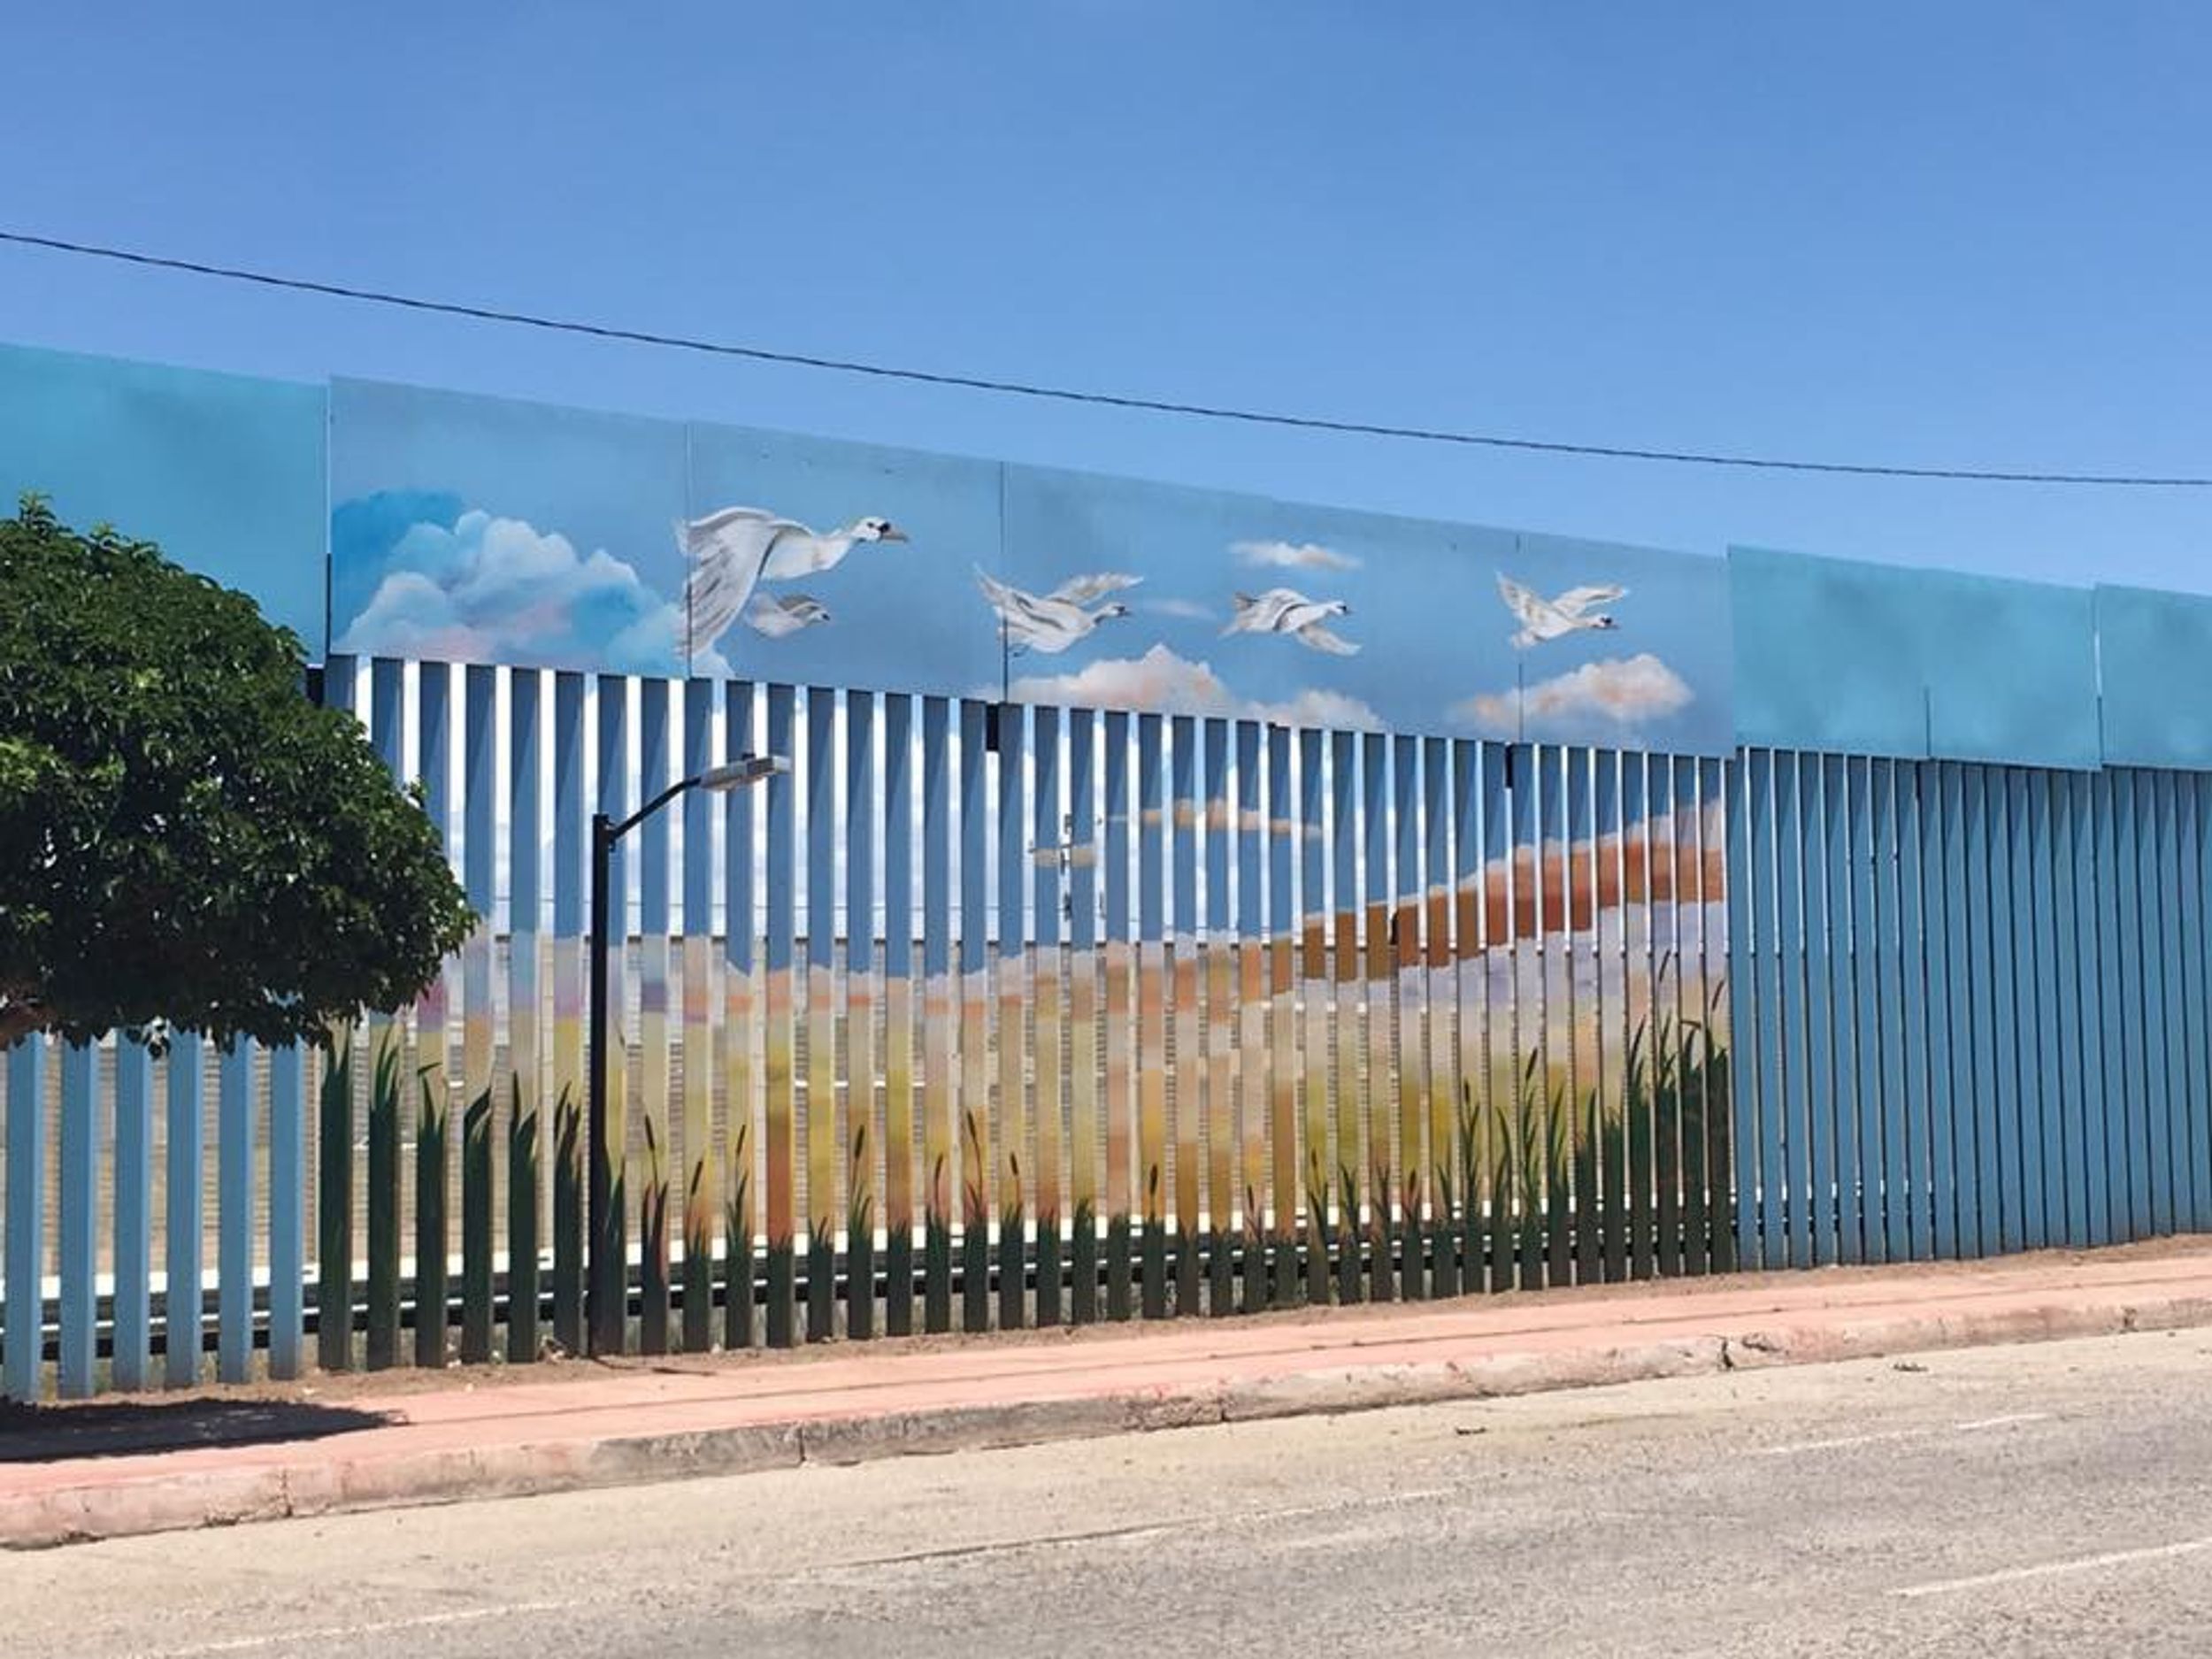 The Significance Of Walls: A Trip To The Arizona-Mexico Border